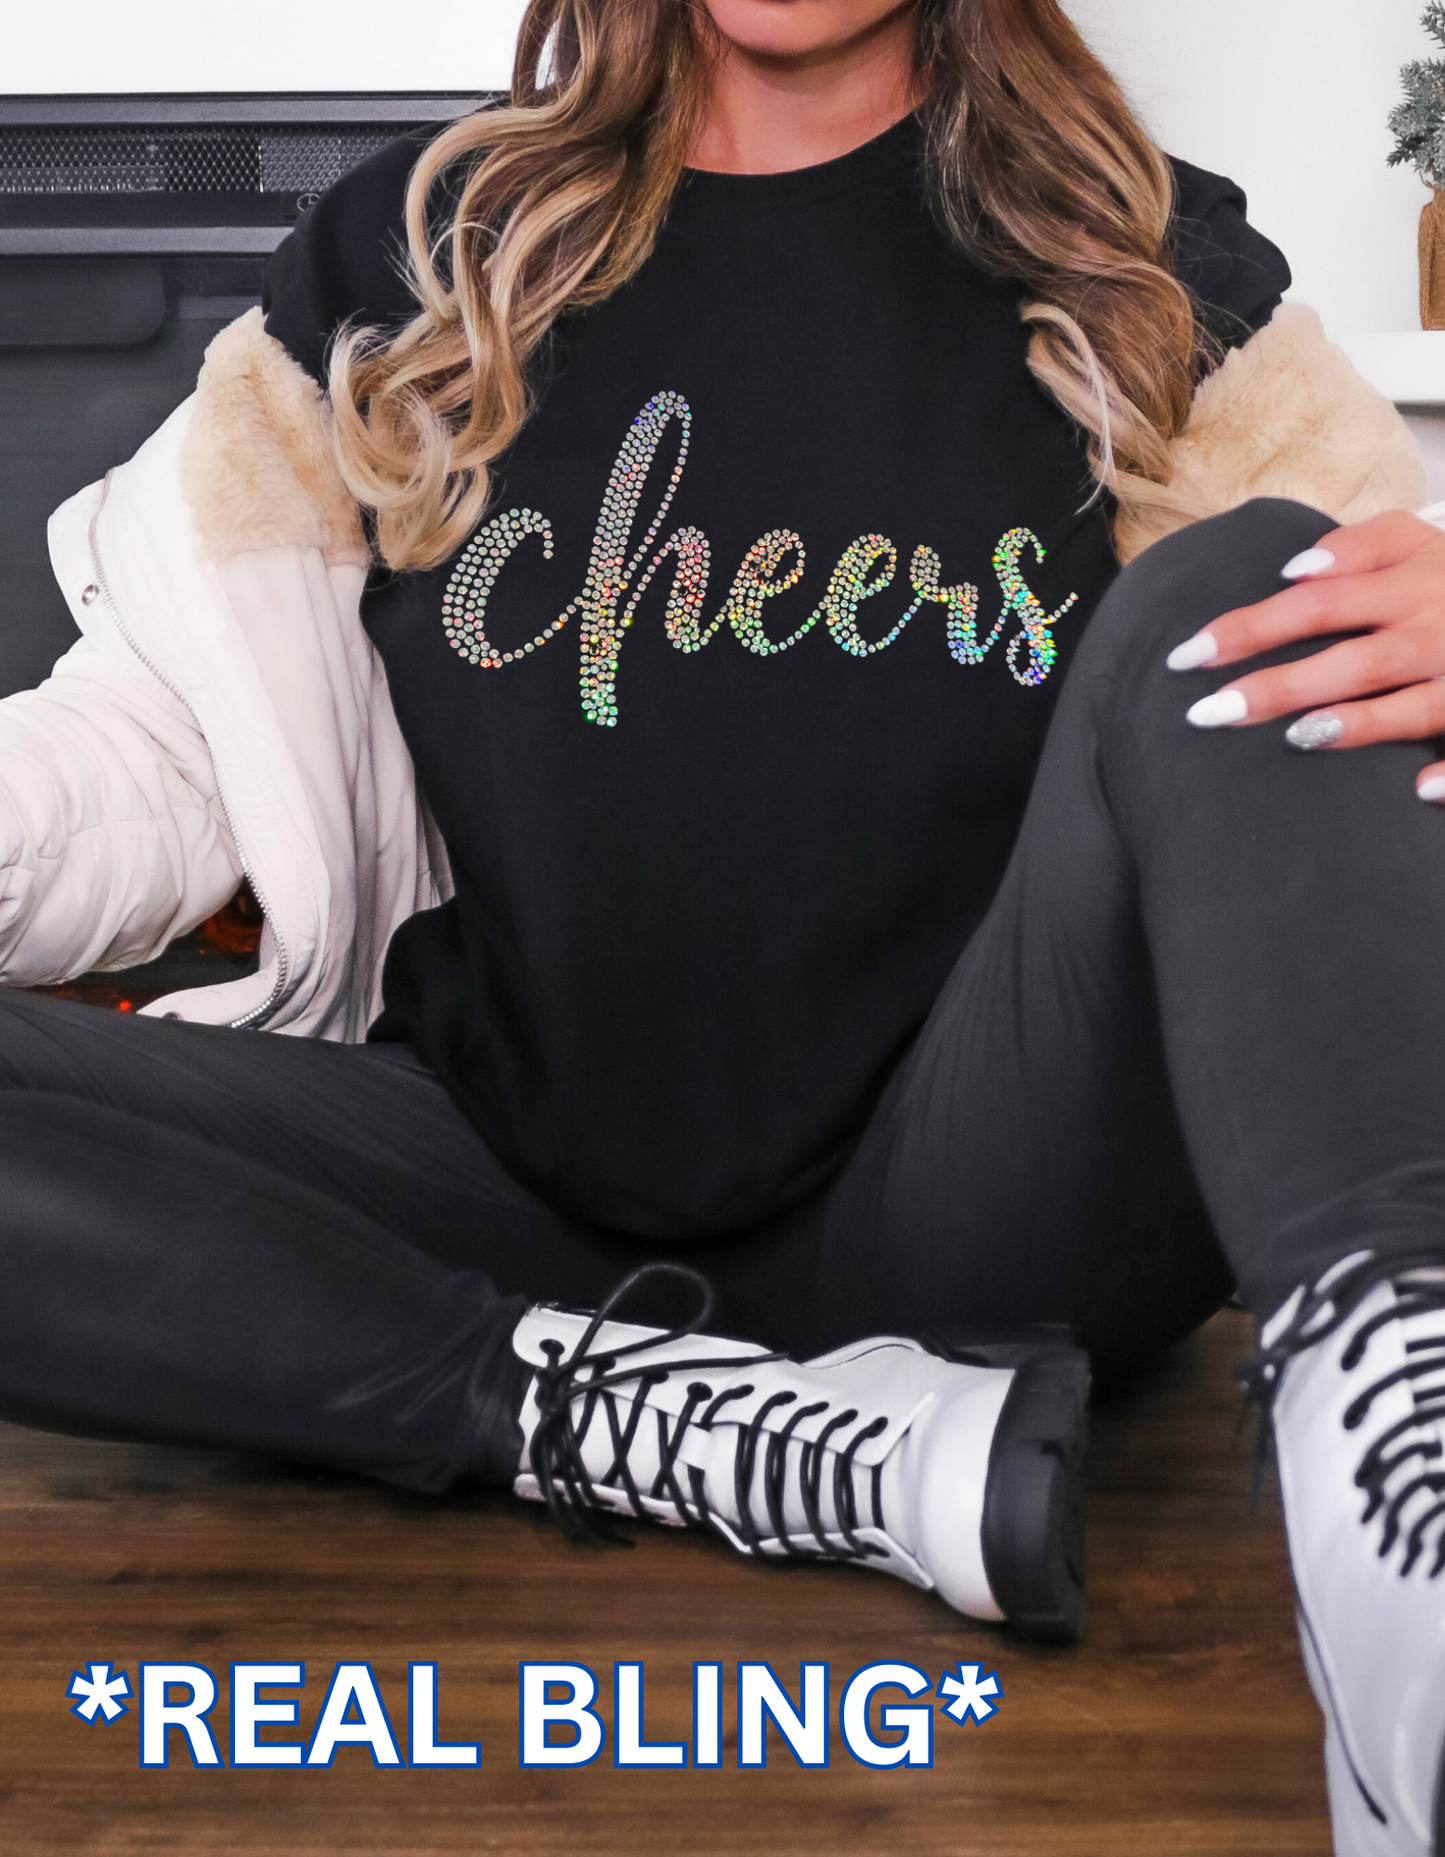 New Year’s Eve Cheers T Shirt- Gold or Silver